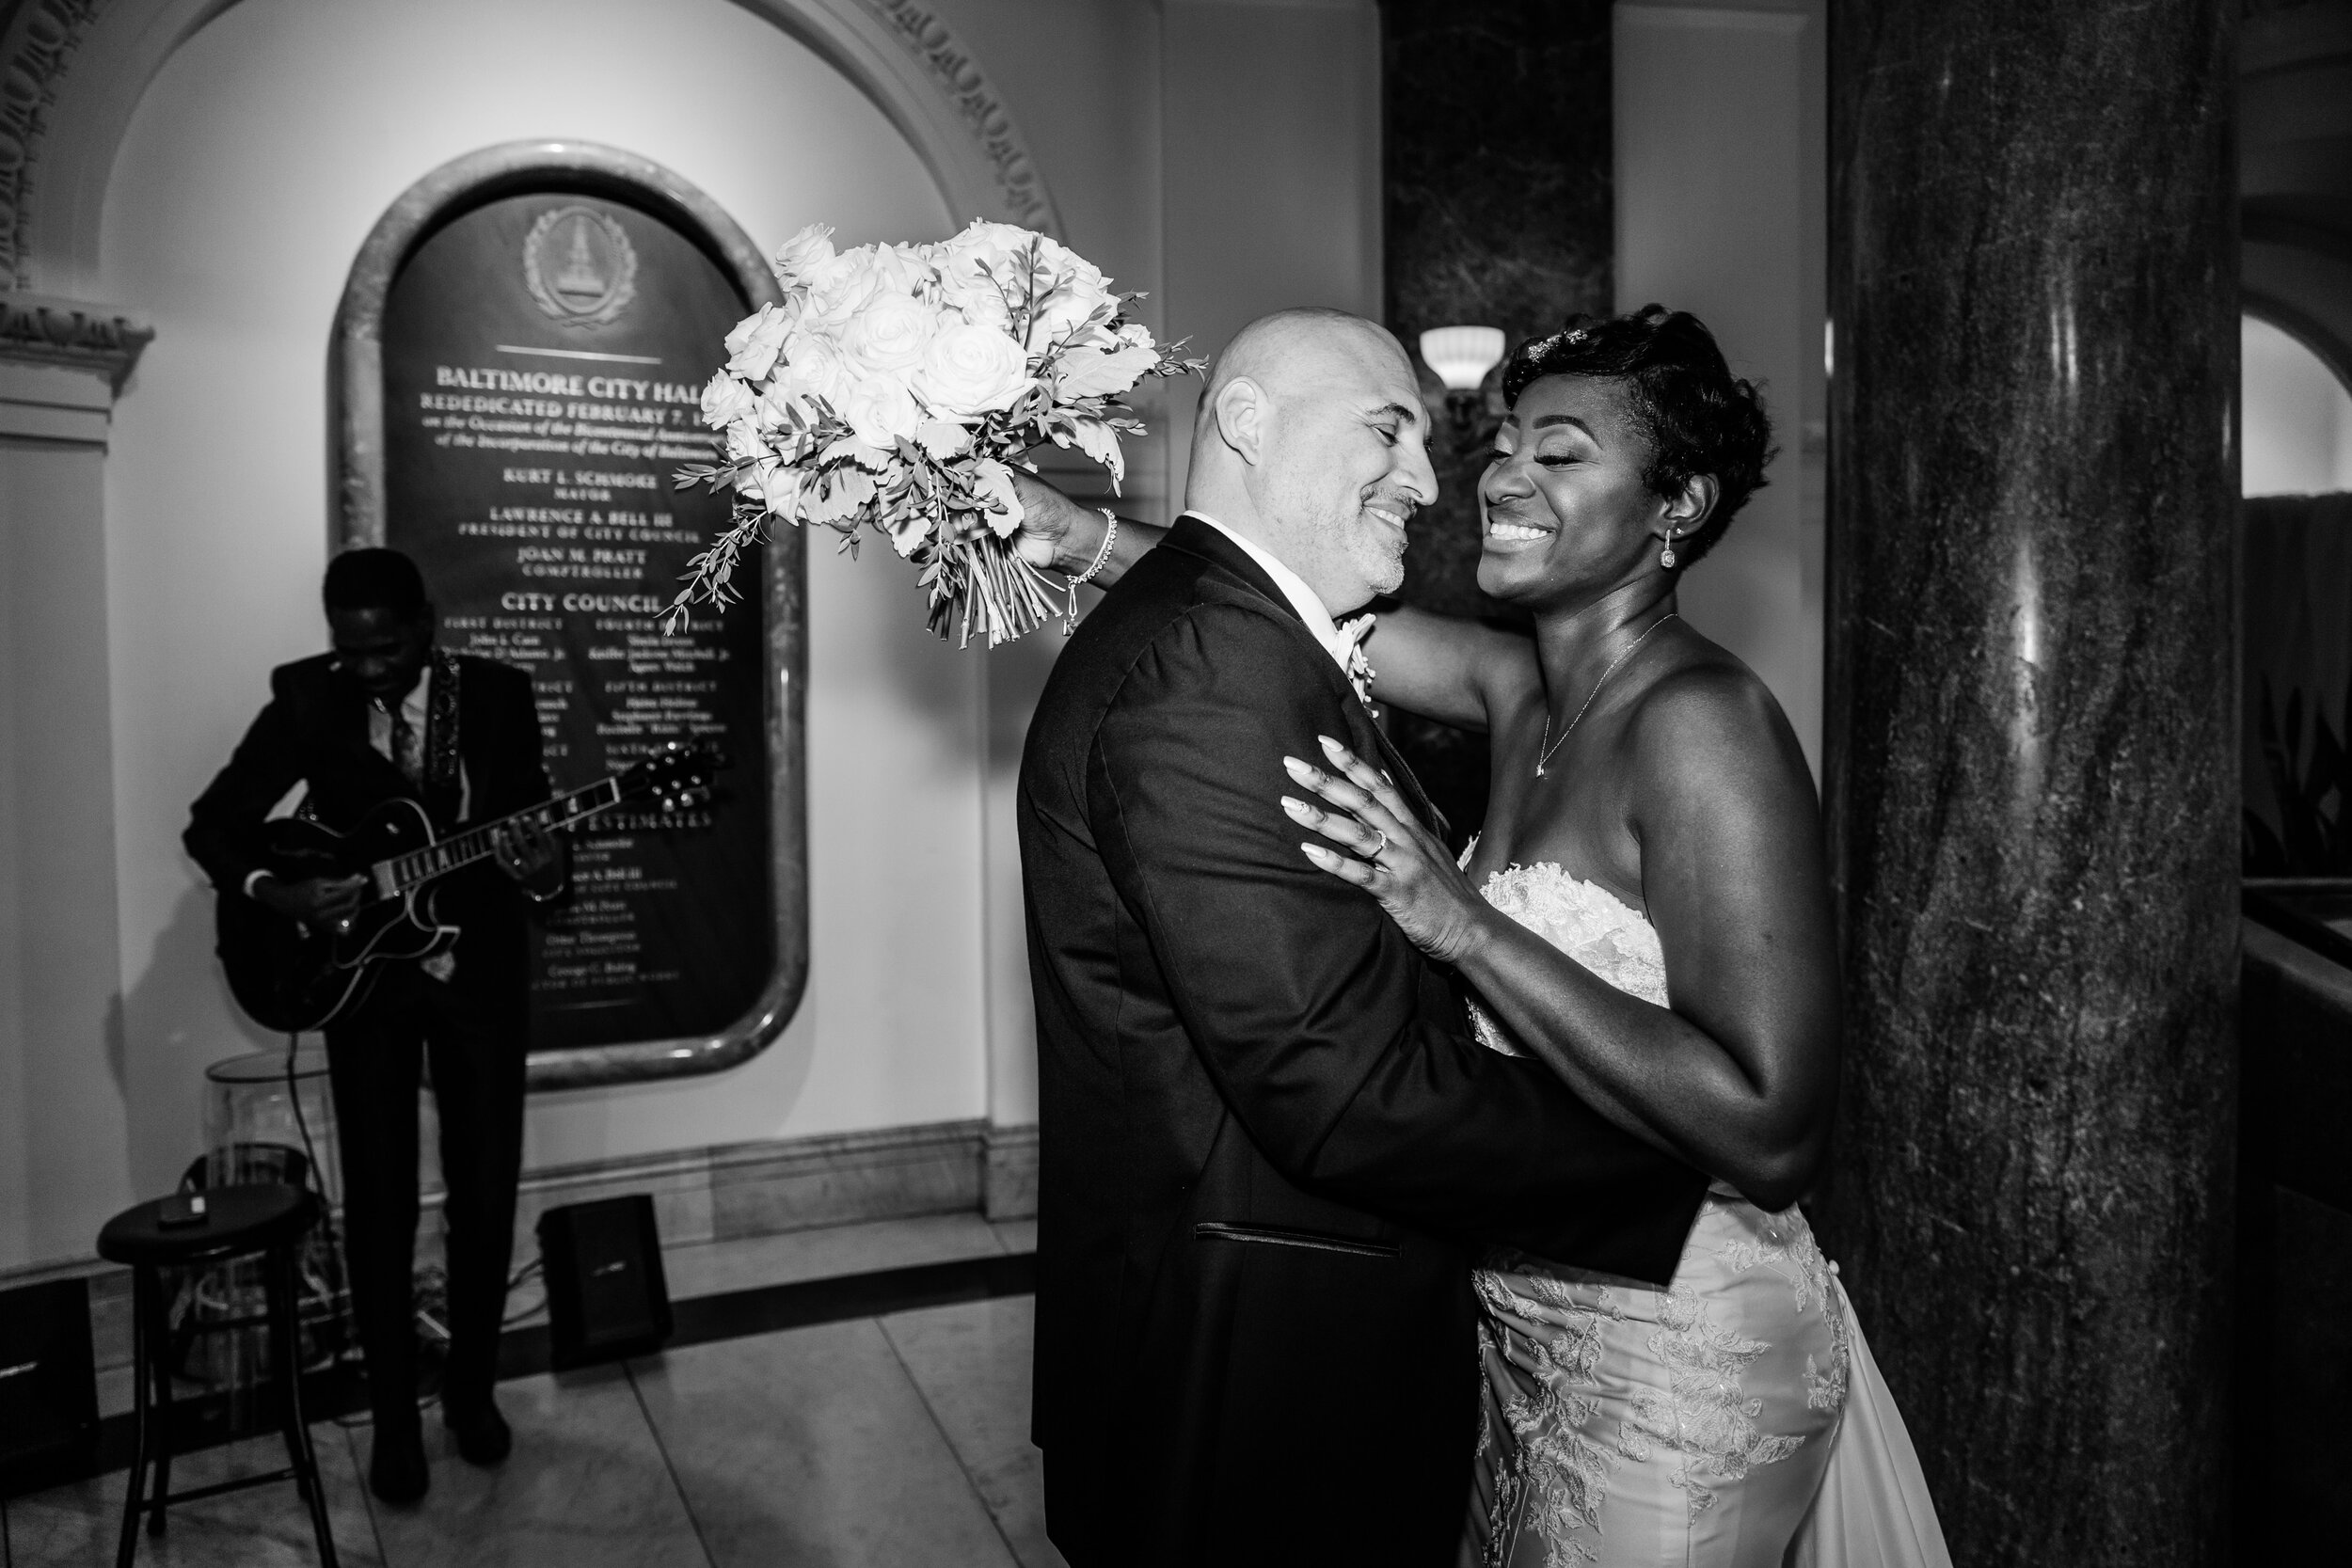 get married in baltimore city hall shot by megapixels media biracial couple wedding photographers maryland-81.jpg